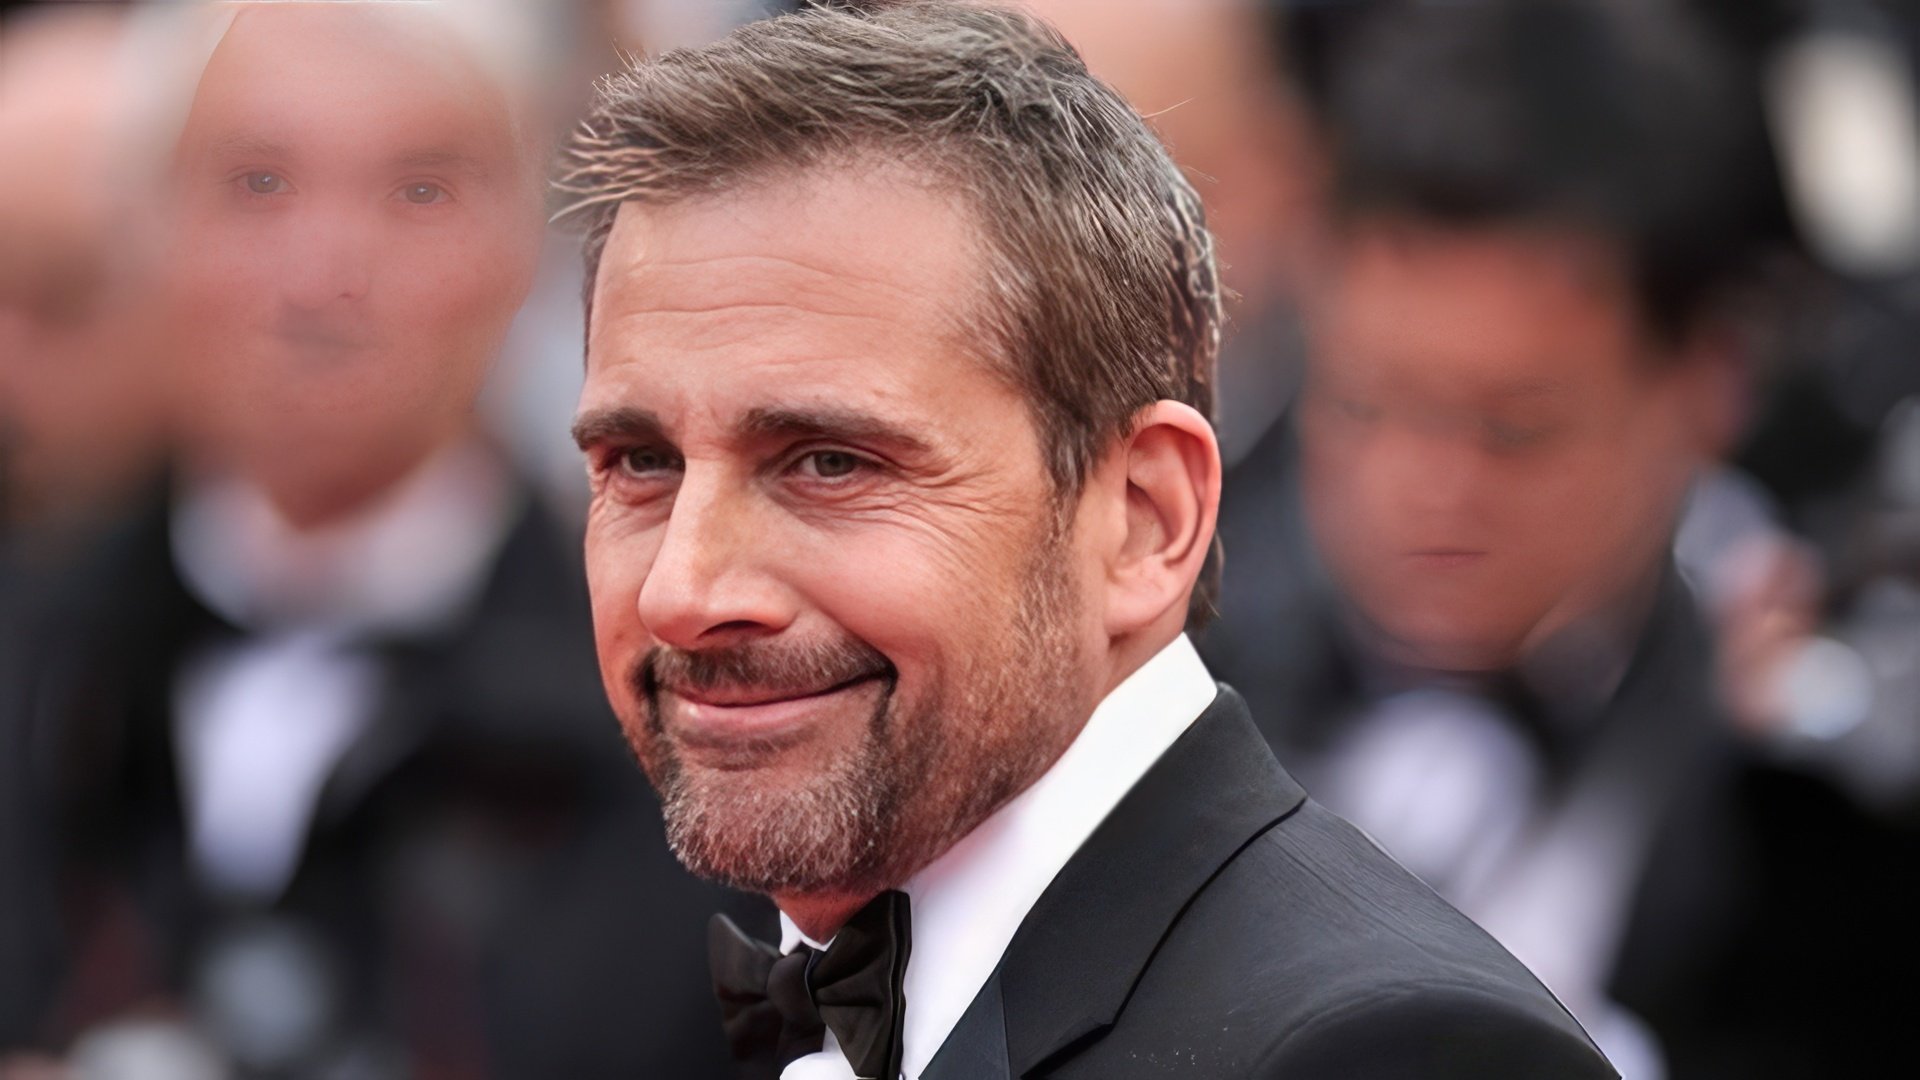 Some premieres are scheduled for release in 2018 starring Steve Carell